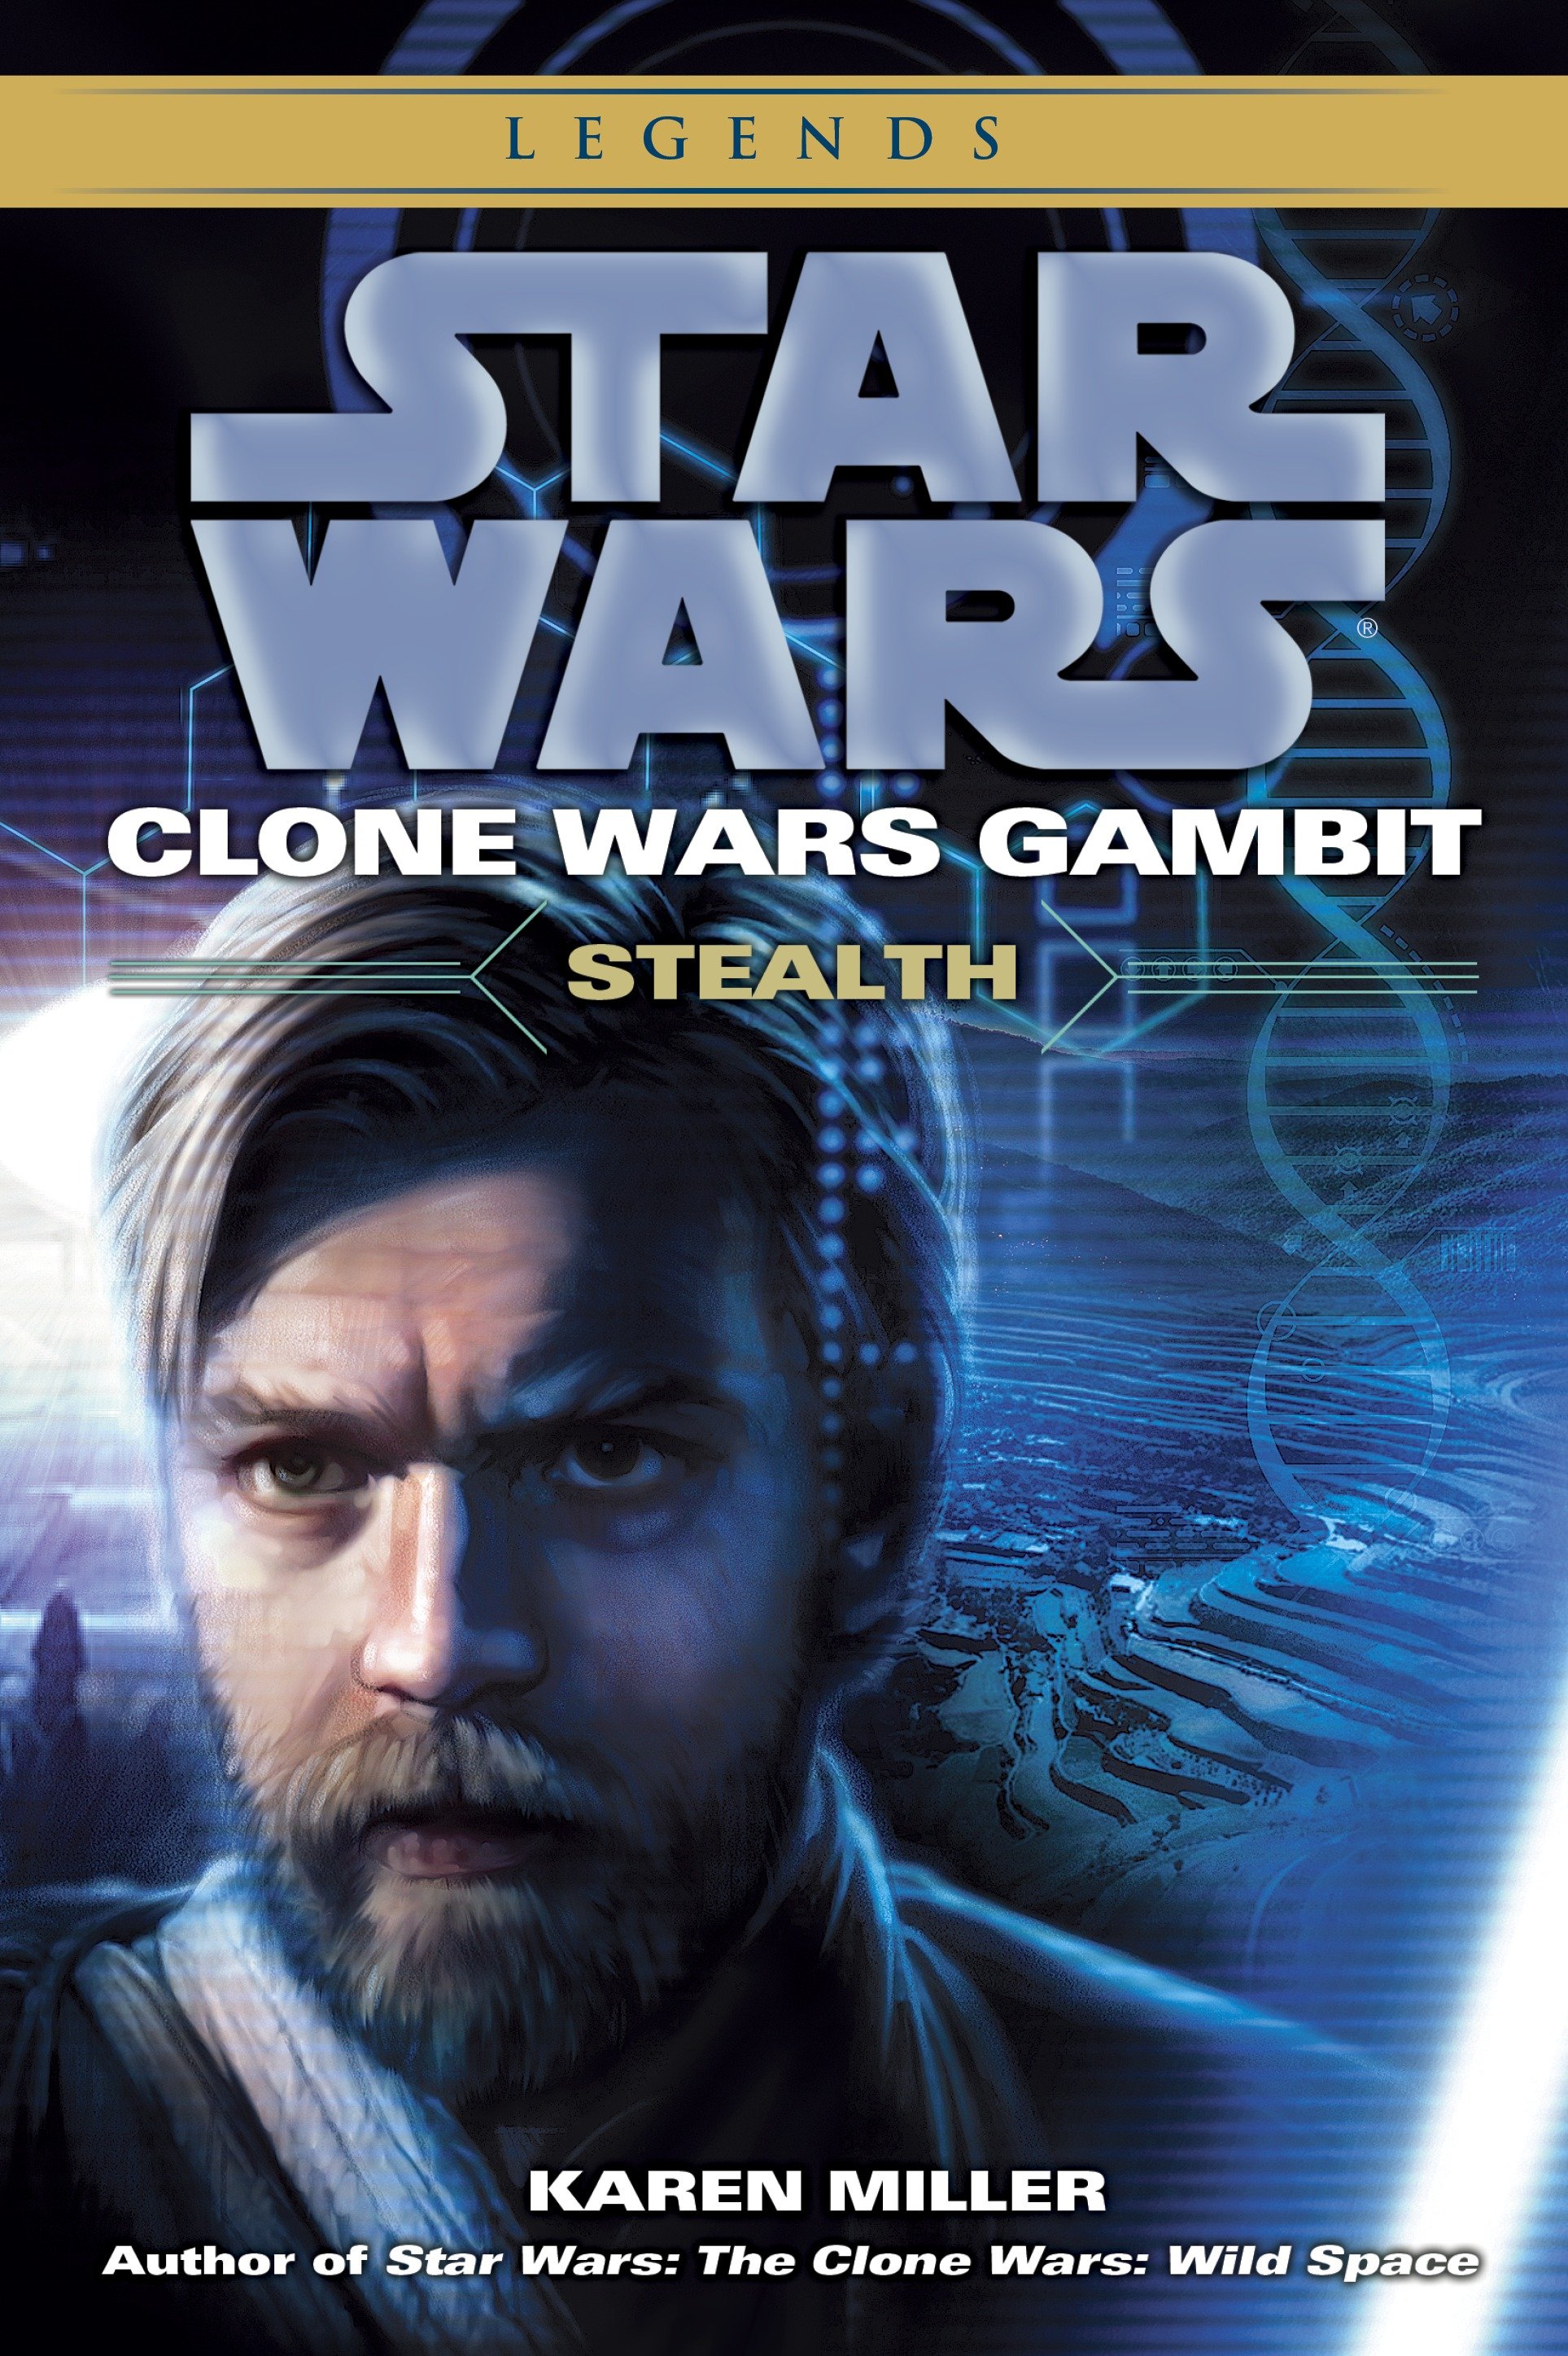 Star Wars Clone Wars Gambit Soft Cover Stealth